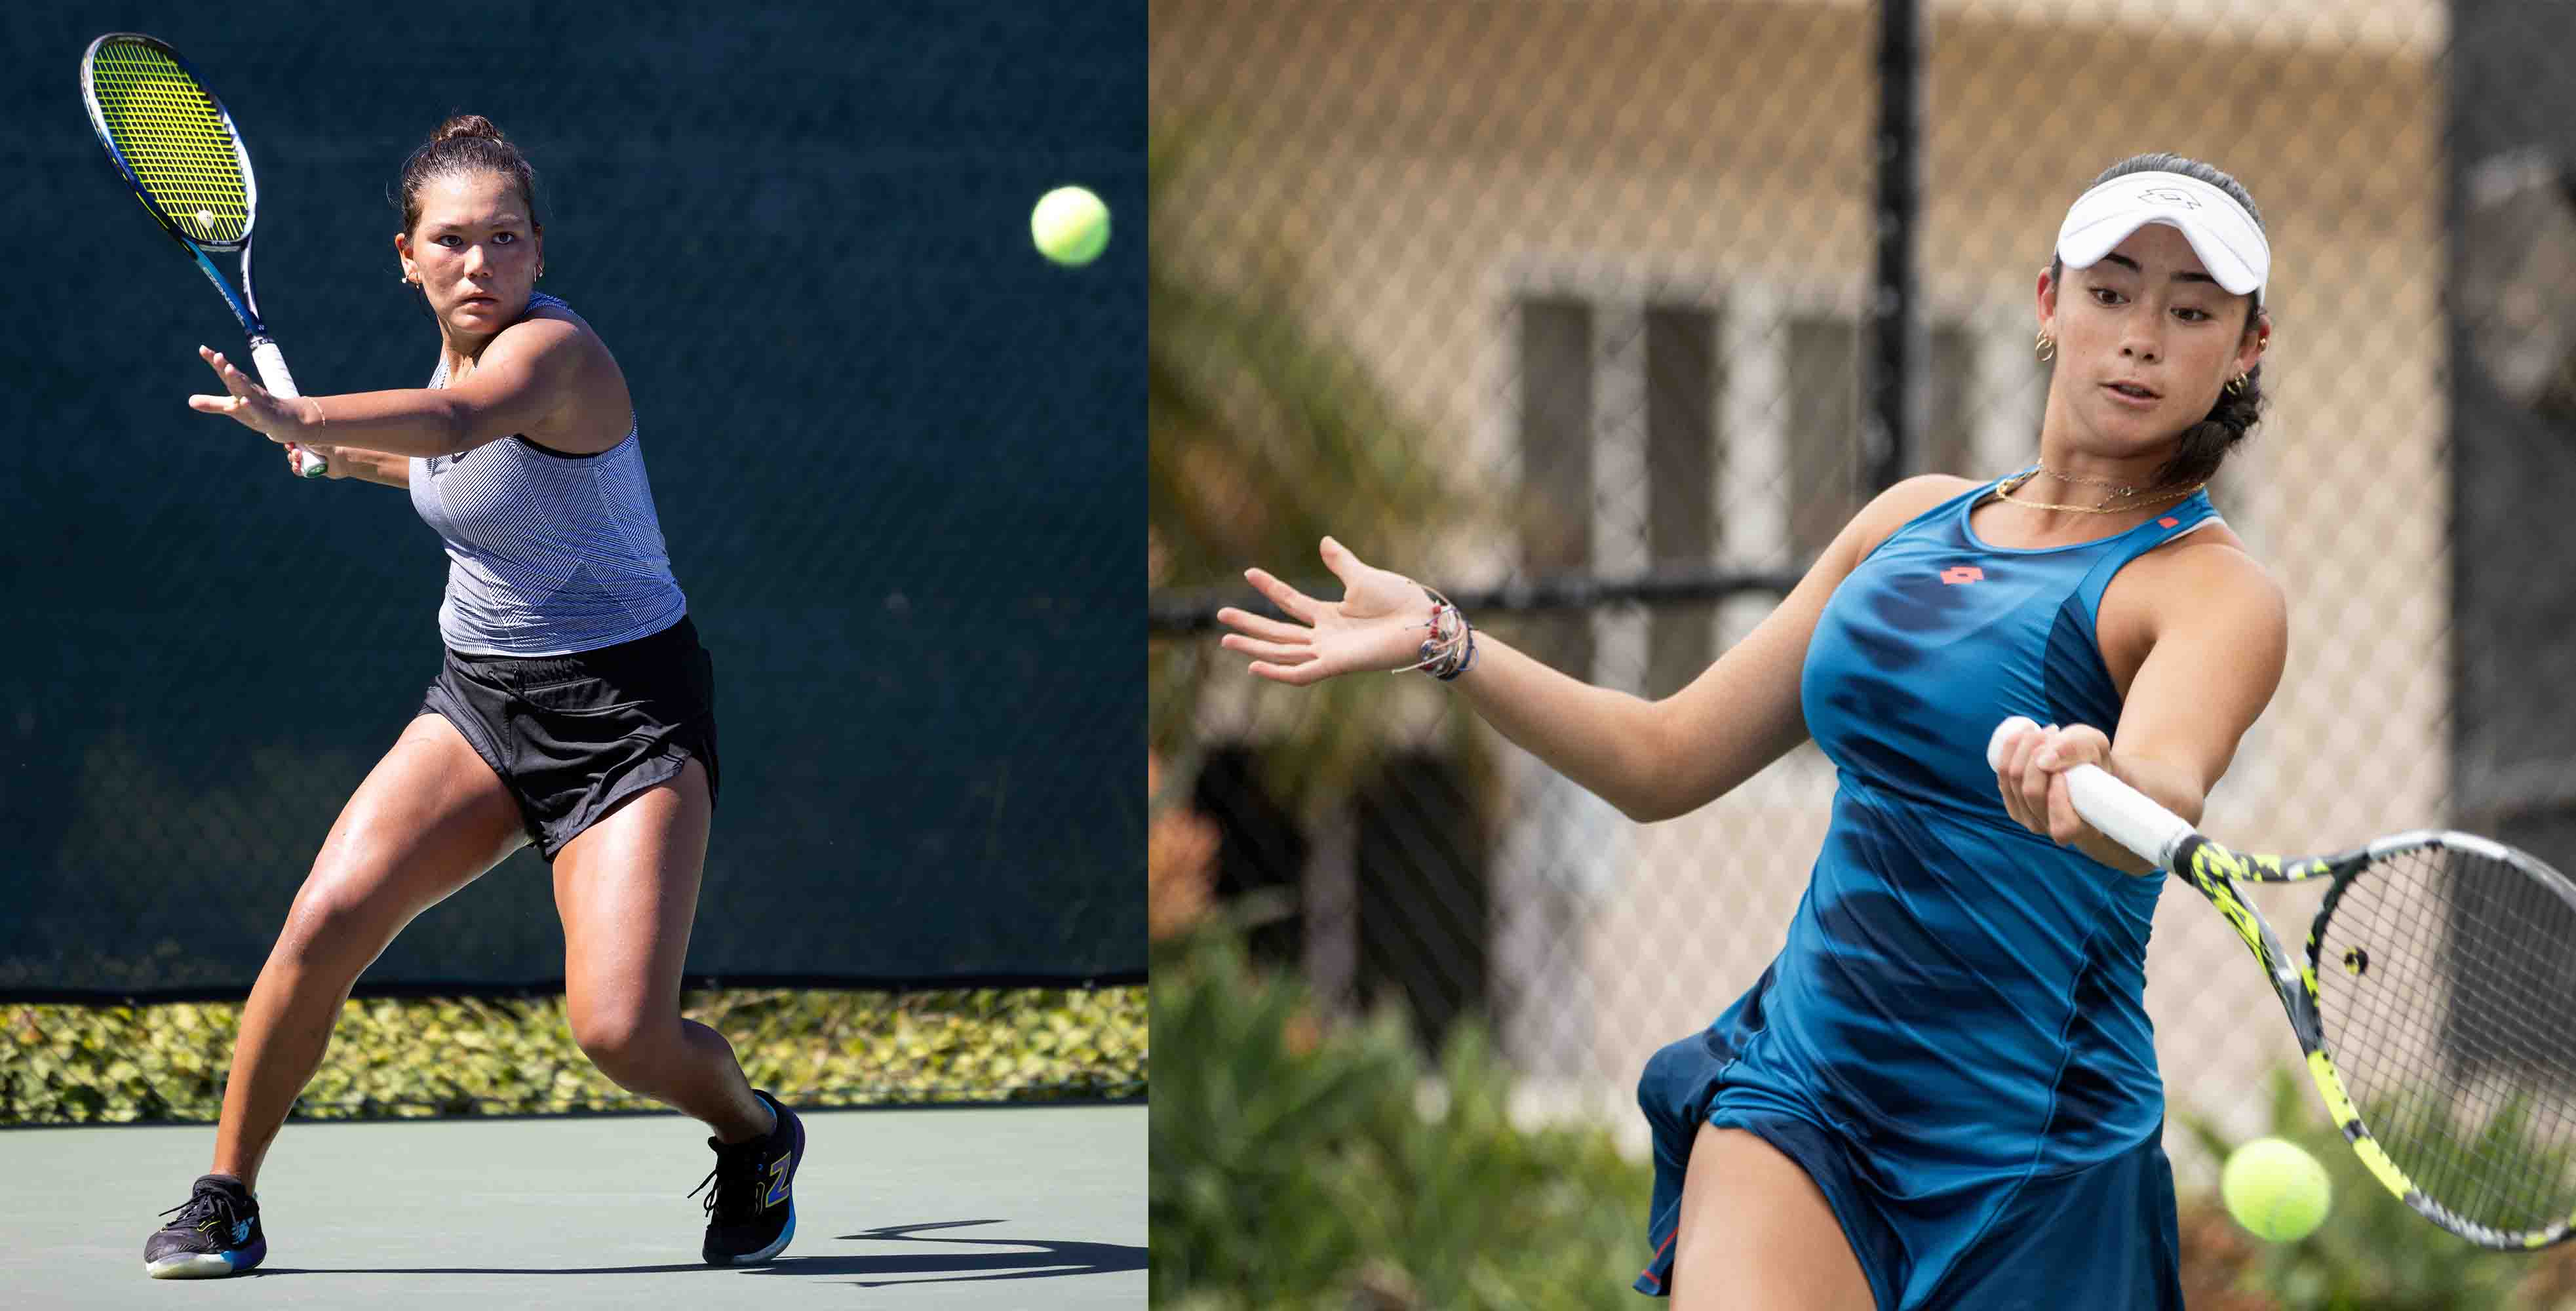 The two UCLA women's tennis recruits, incoming freshmen Kate Fakih (left) and Oliva Center (right), return shots at the SoCal Pro Series. (Left to right: Courtesy of USTA SoCal/Jon Mulvey, Courtesy of USTA SoCal/Lexie Wanninger)